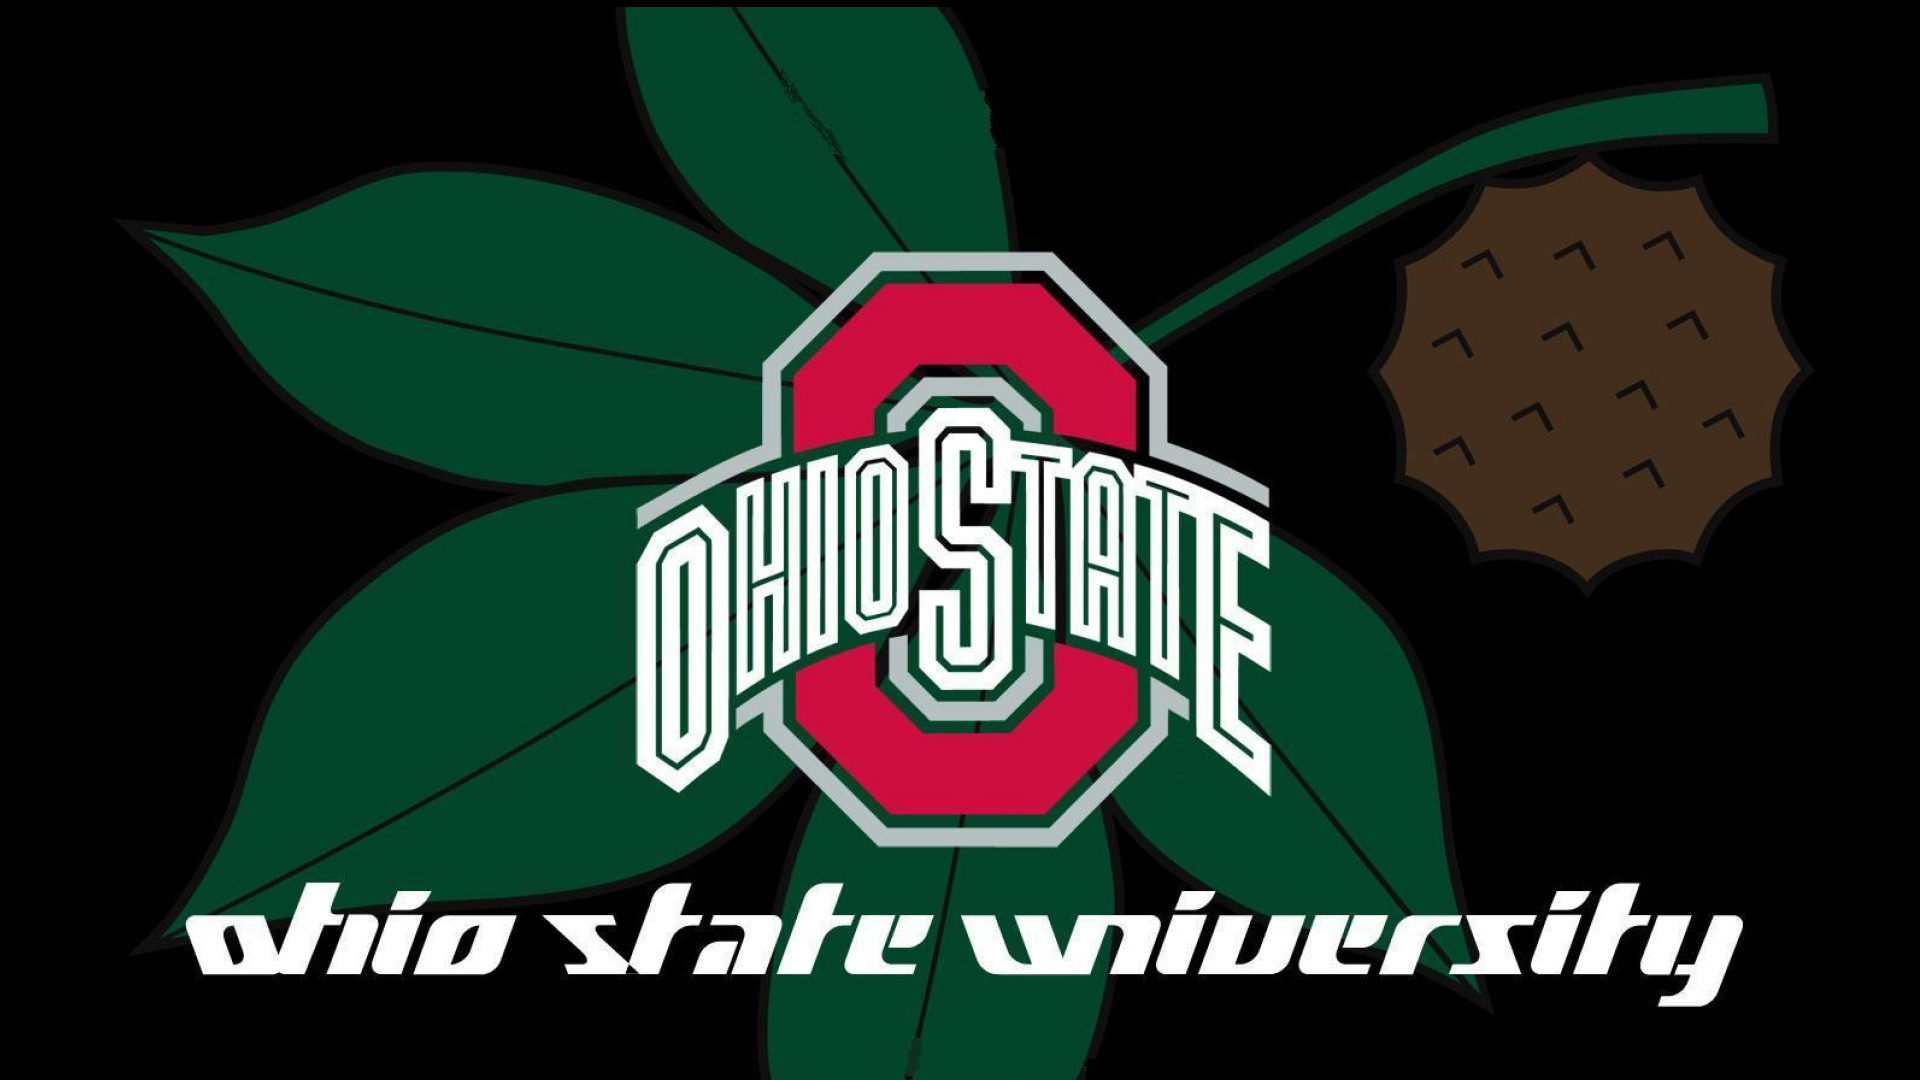 1920x1080 Ohio State Buckeyes images OHIO STATE UNIVERSITY RED BLOCK O & BUCKEYE LEAF  HD wallpaper and background photos